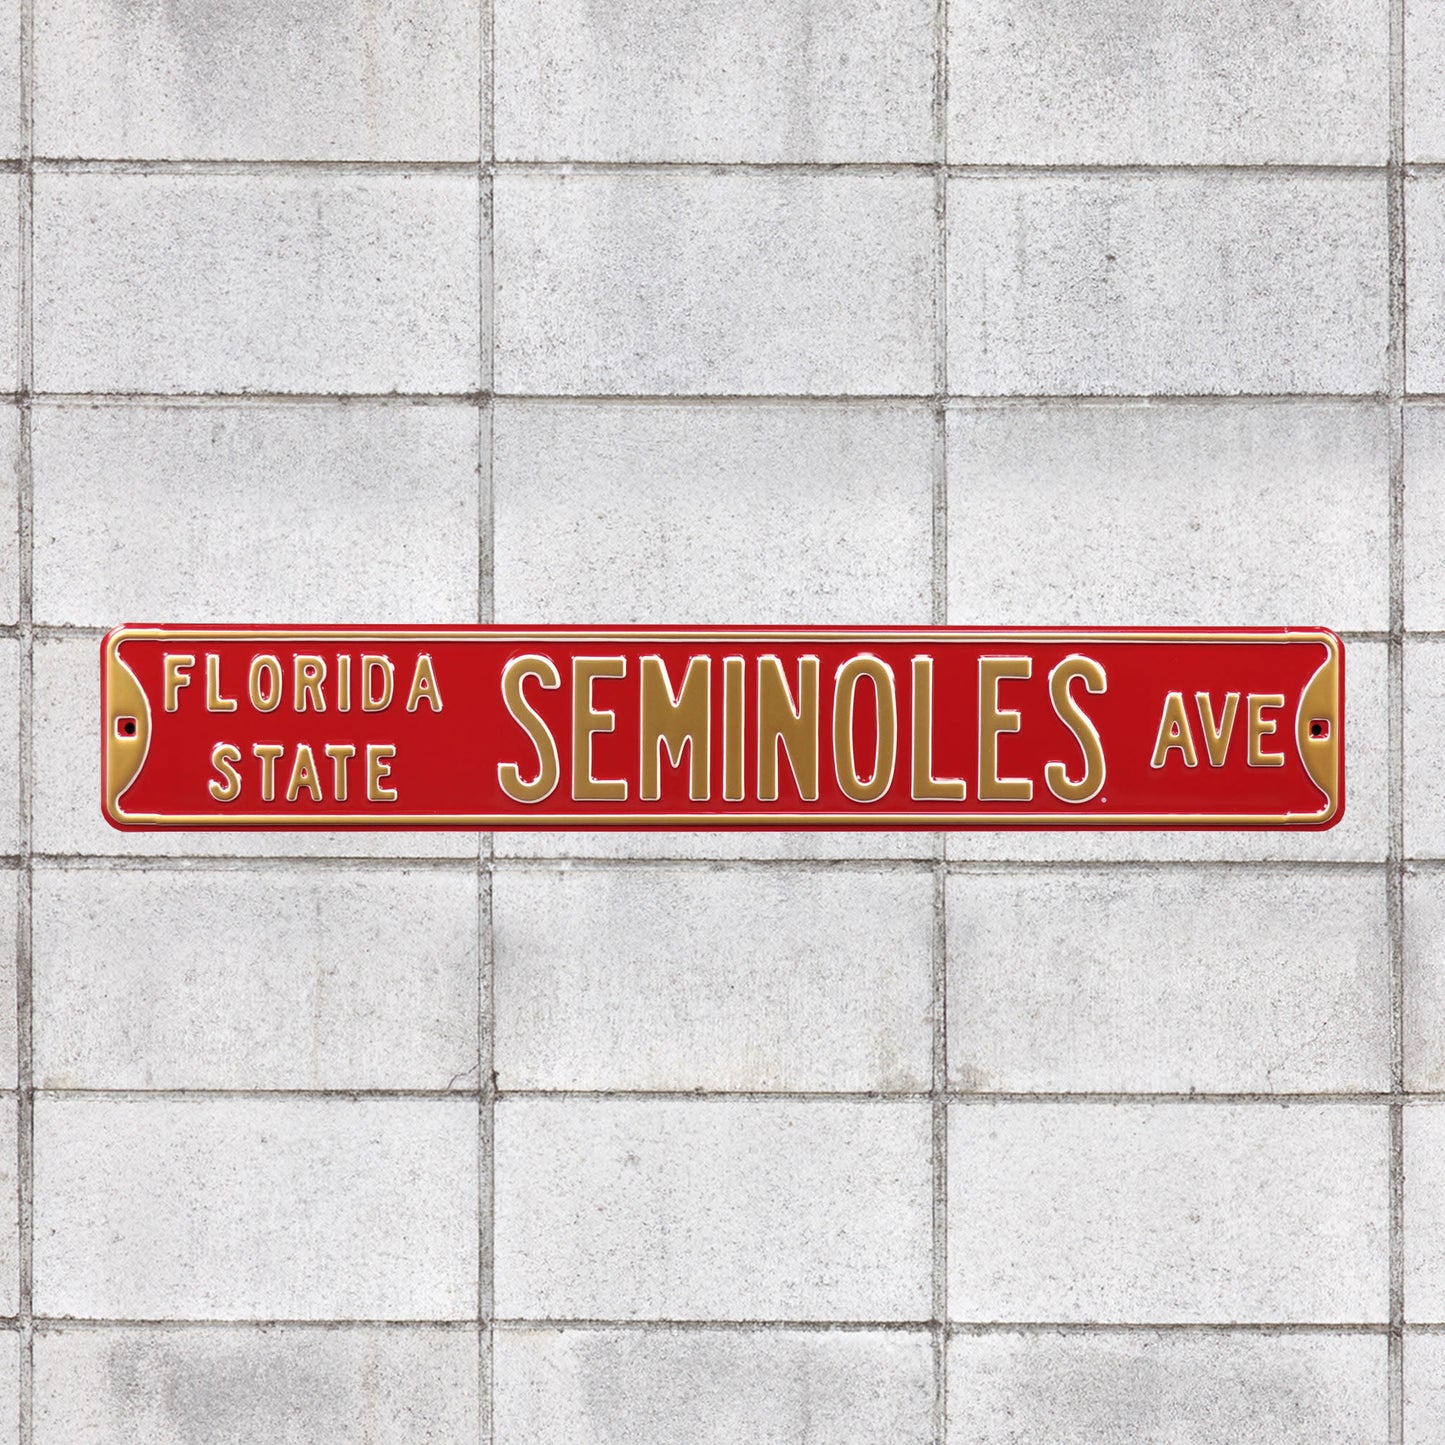 Florida State Seminoles: Florida State Seminoles Avenue (Burgandy) - Officially Licensed Metal Stree